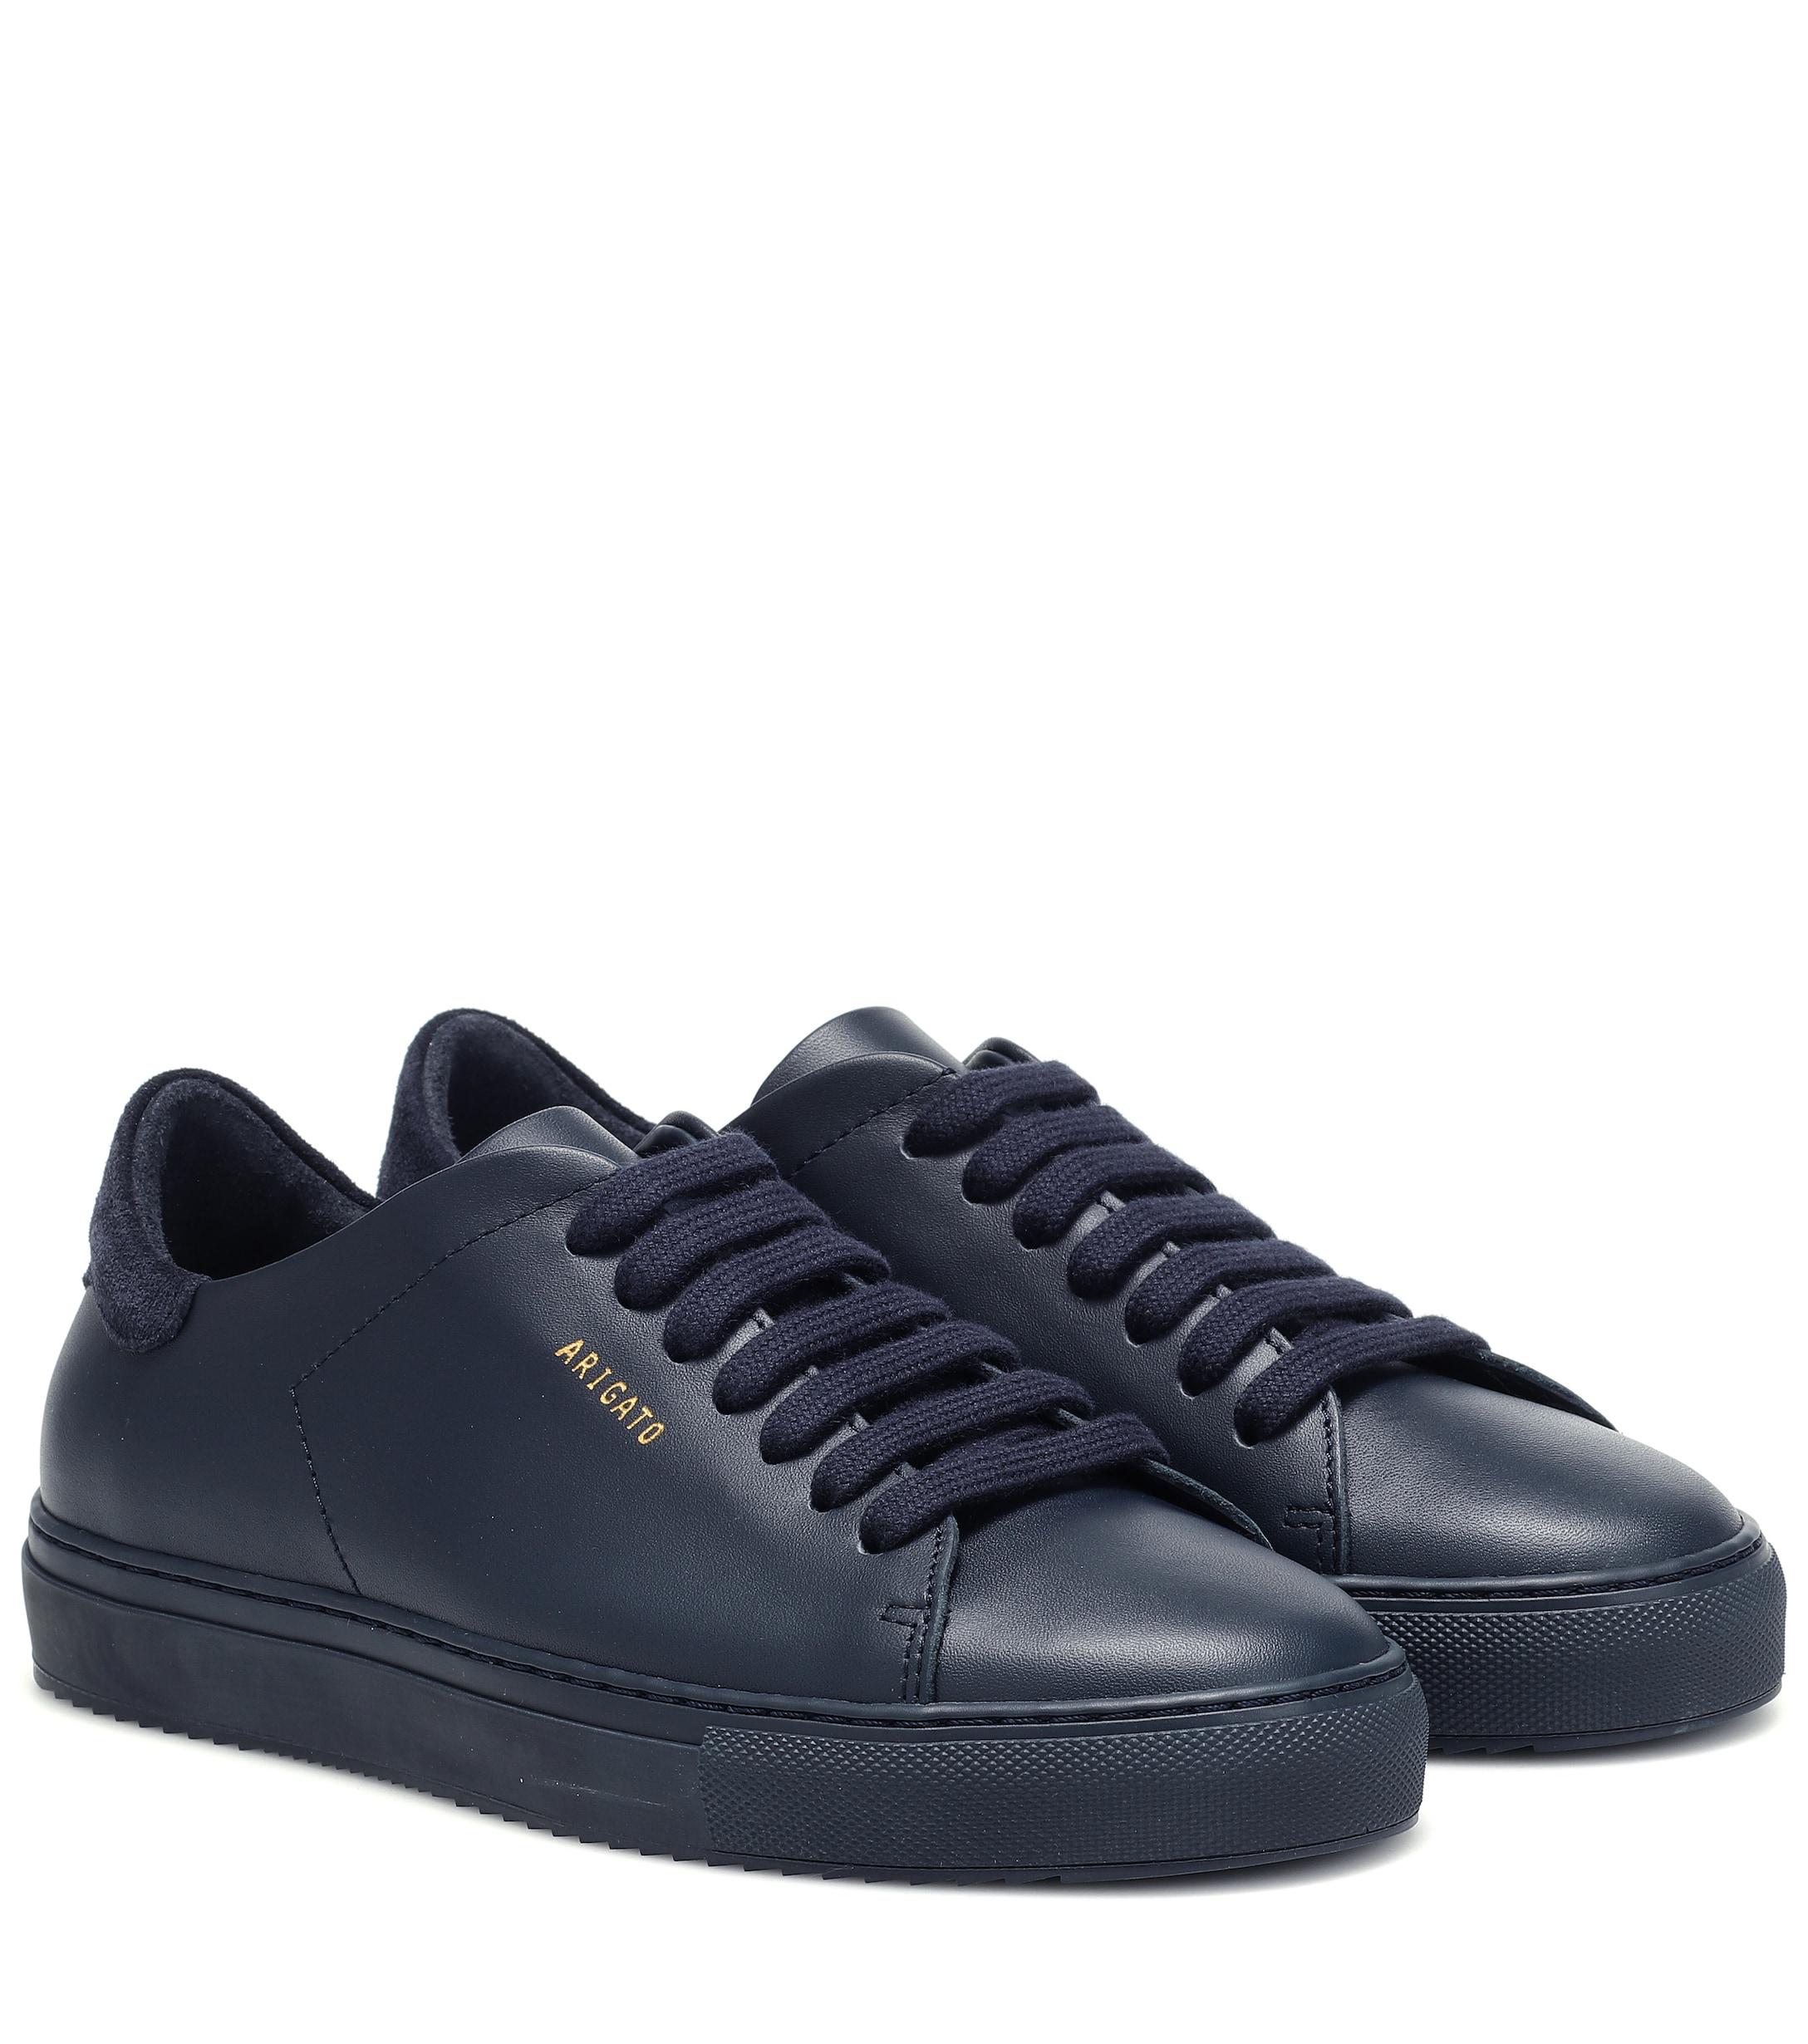 Axel Arigato Clean 90 Leather Sneakers in Blue - Lyst